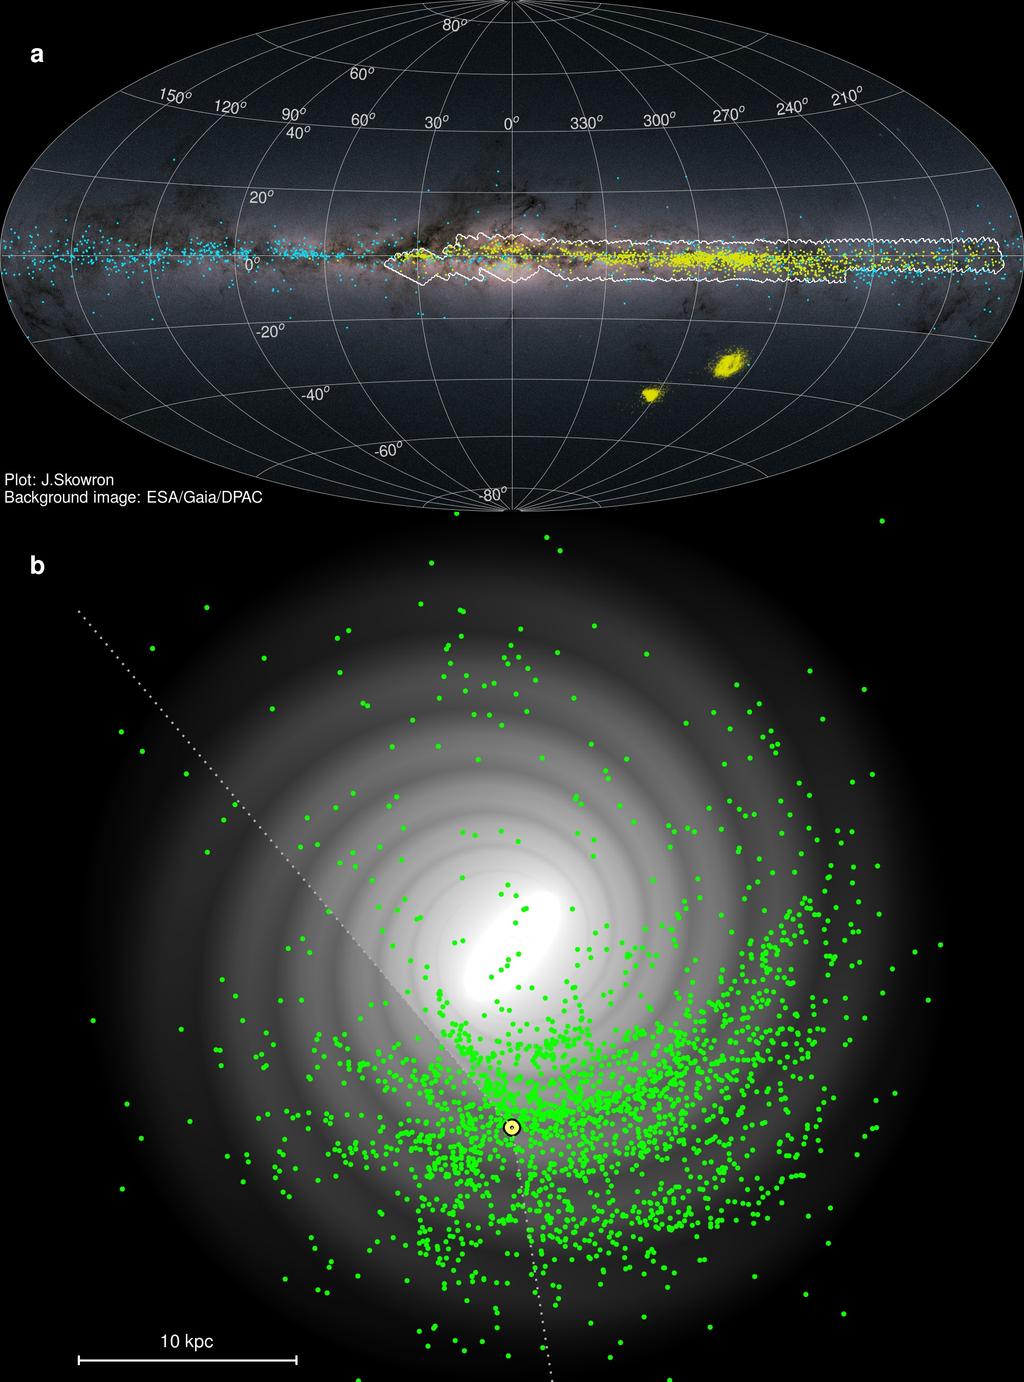 Figure 1: The distribution of Galactic Classical Cepheids.